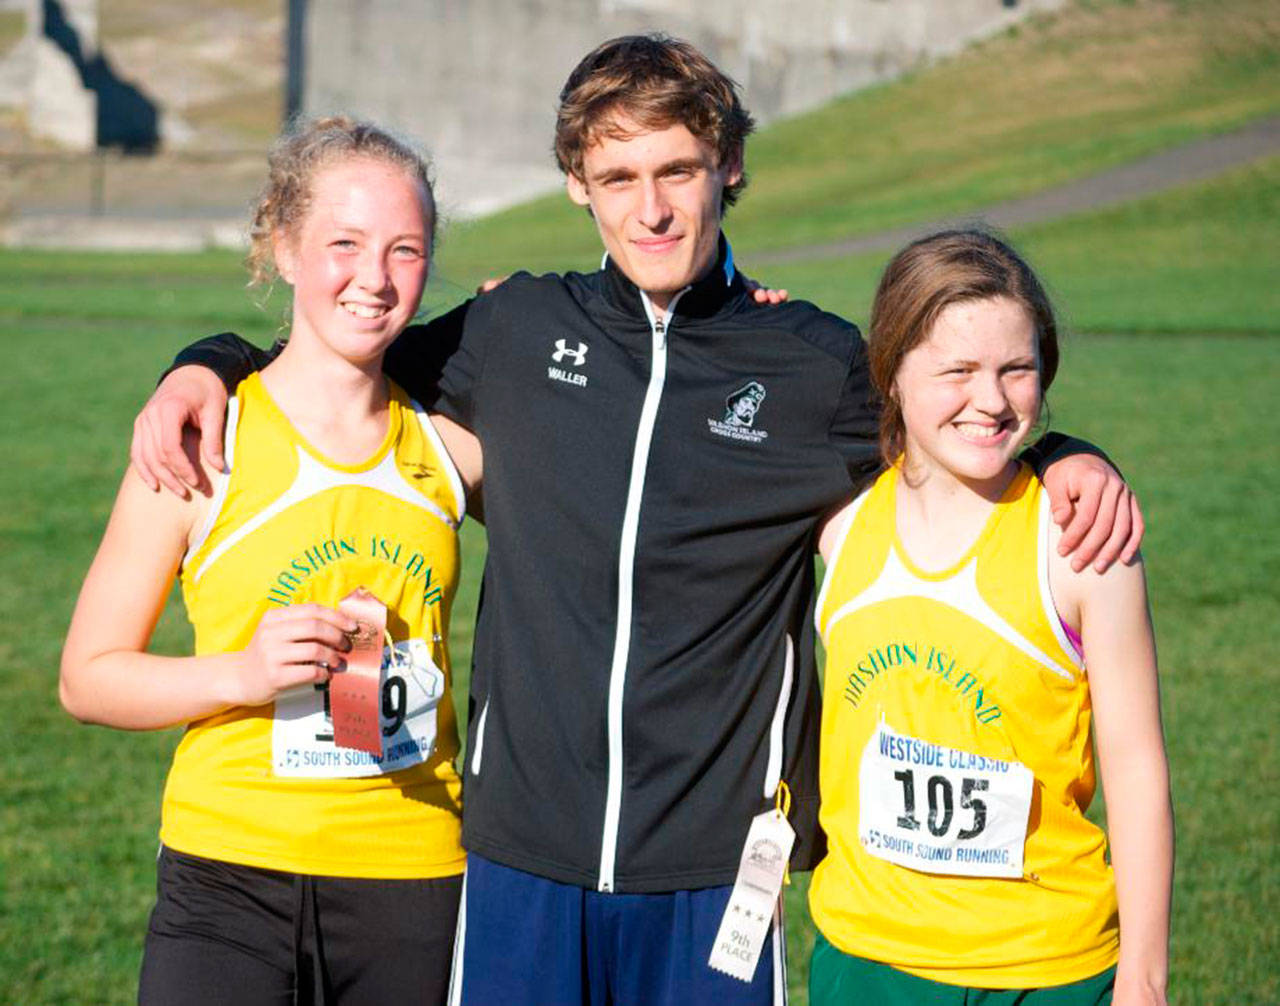 State bound runners are, left to right, Ella Yarkin, Gianno Waller and Lucy Boyle. (Jeff Johnson Photo)